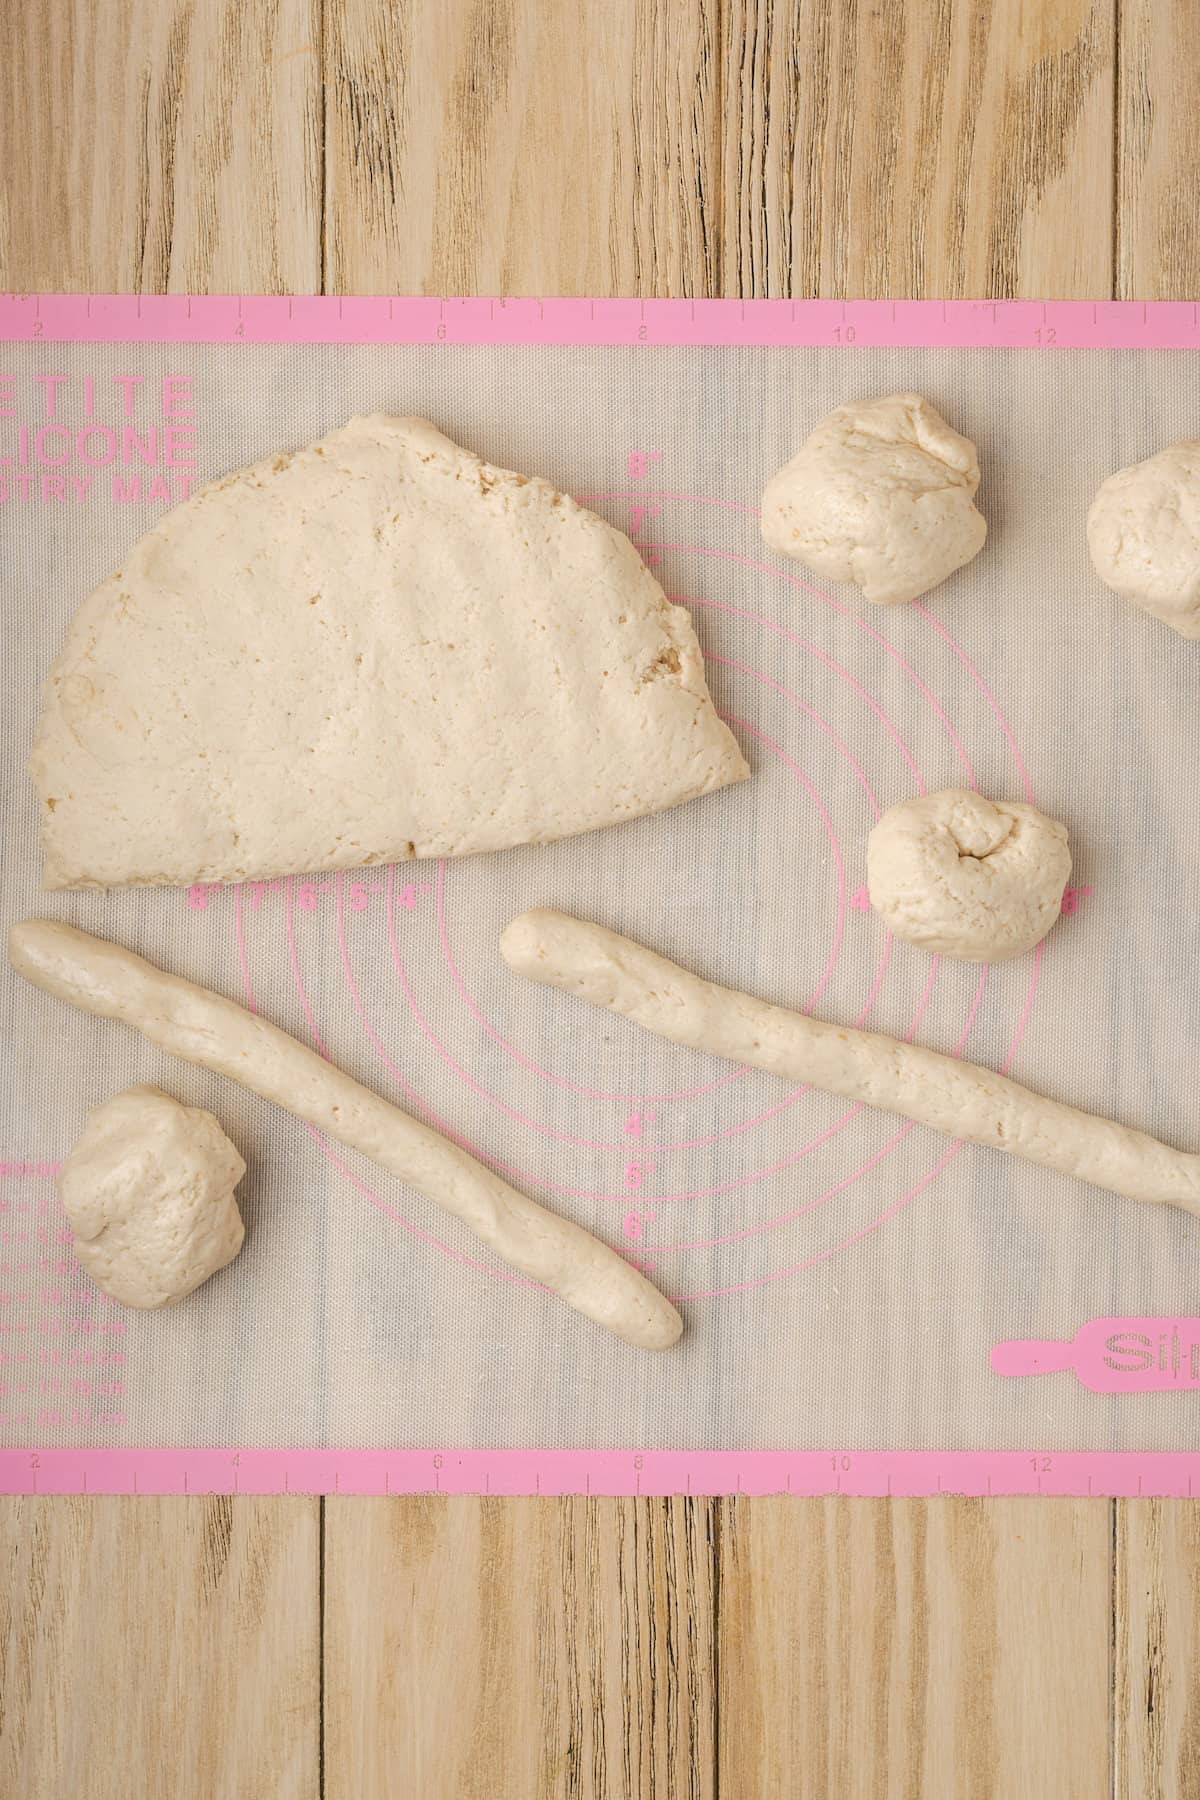 Dough portioned and shaped into balls and ropes on a silpat baking mat.